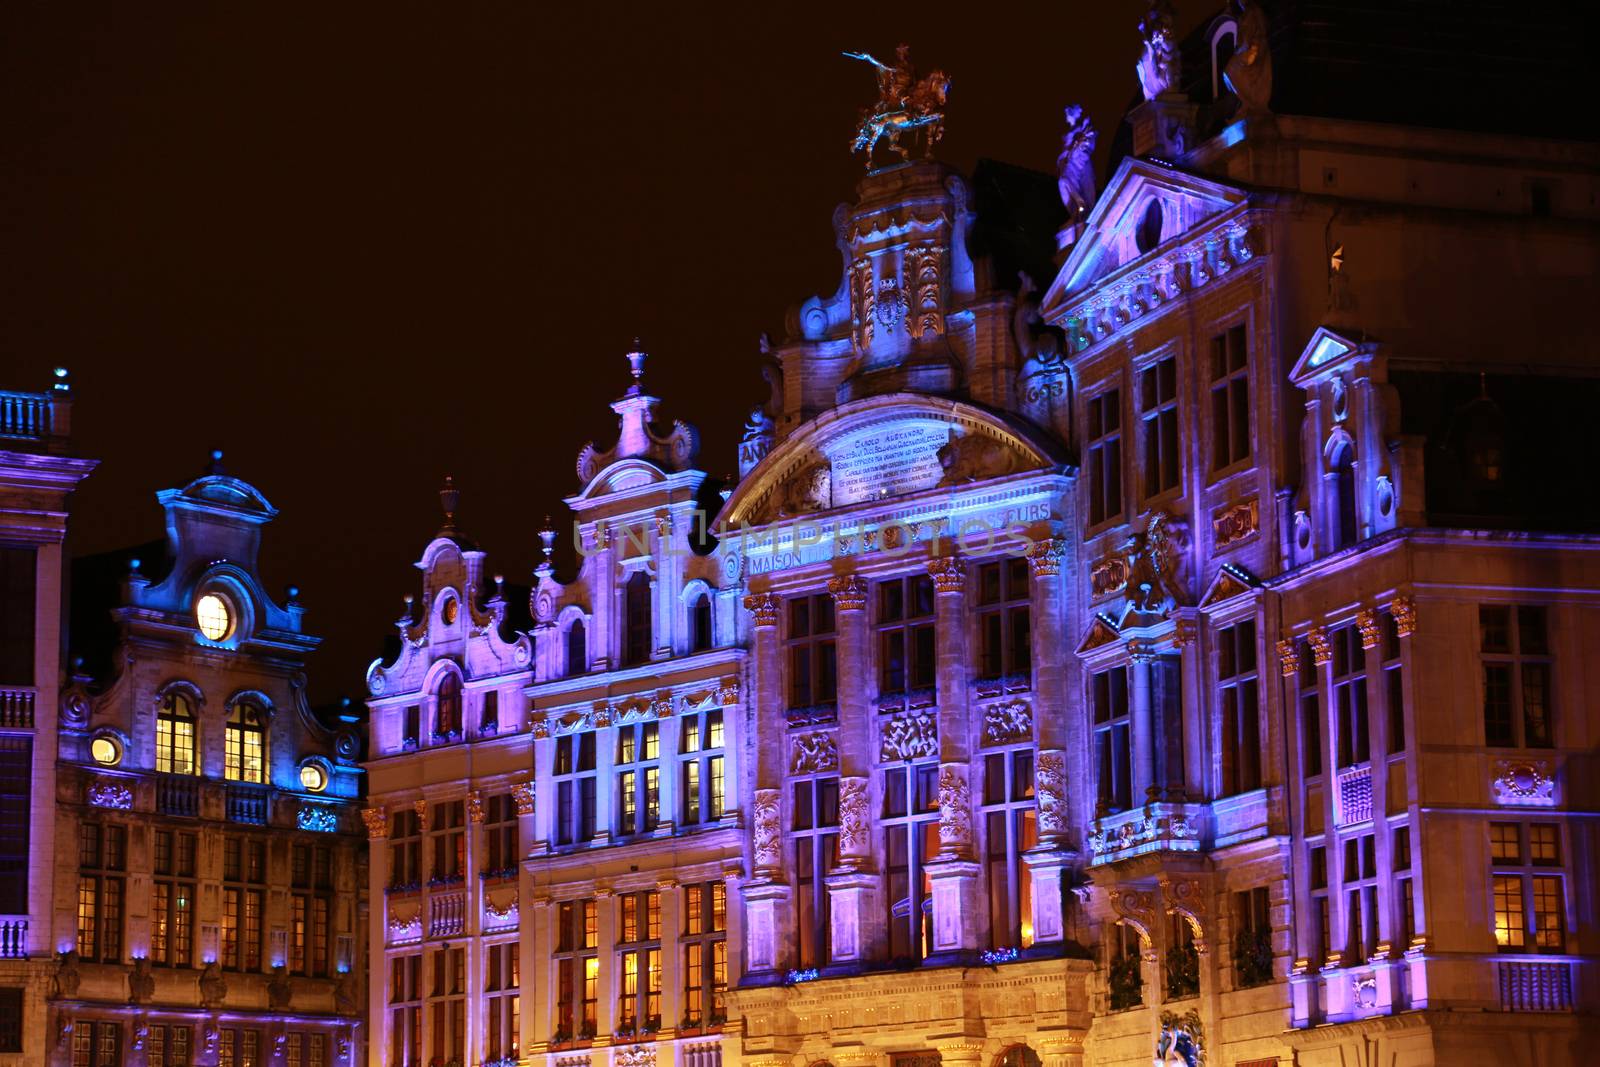 The buildings of the Grand Place of Brussels are illuminated during the winter wonders happening